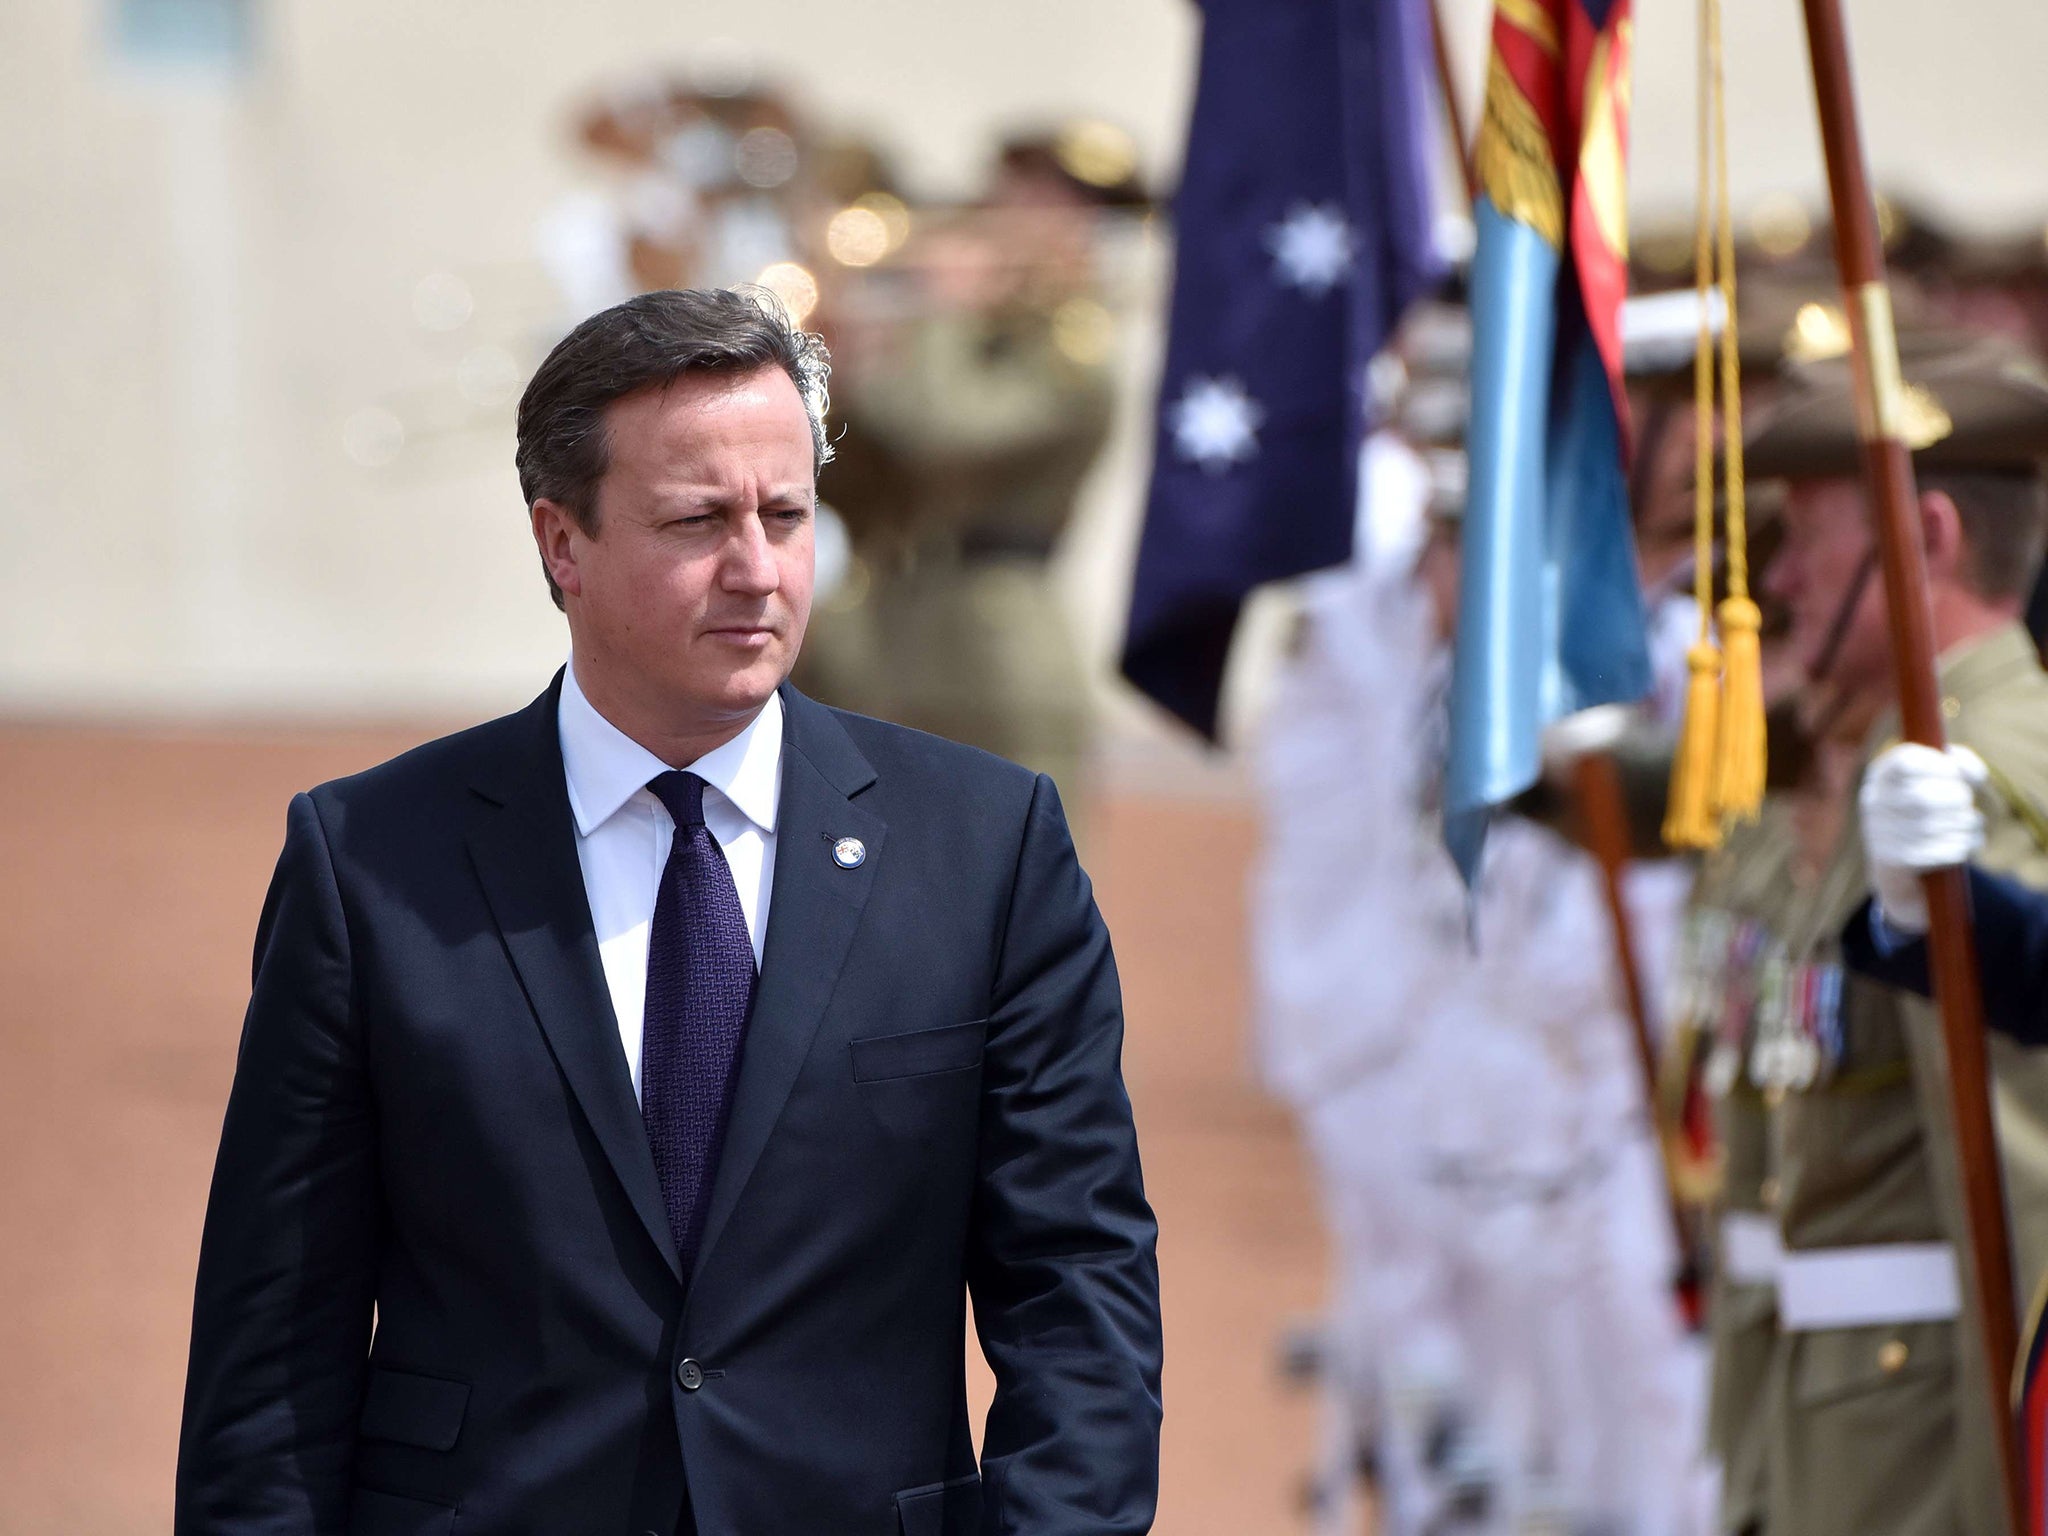 David Cameron inspects the Federation Guard in Canberra